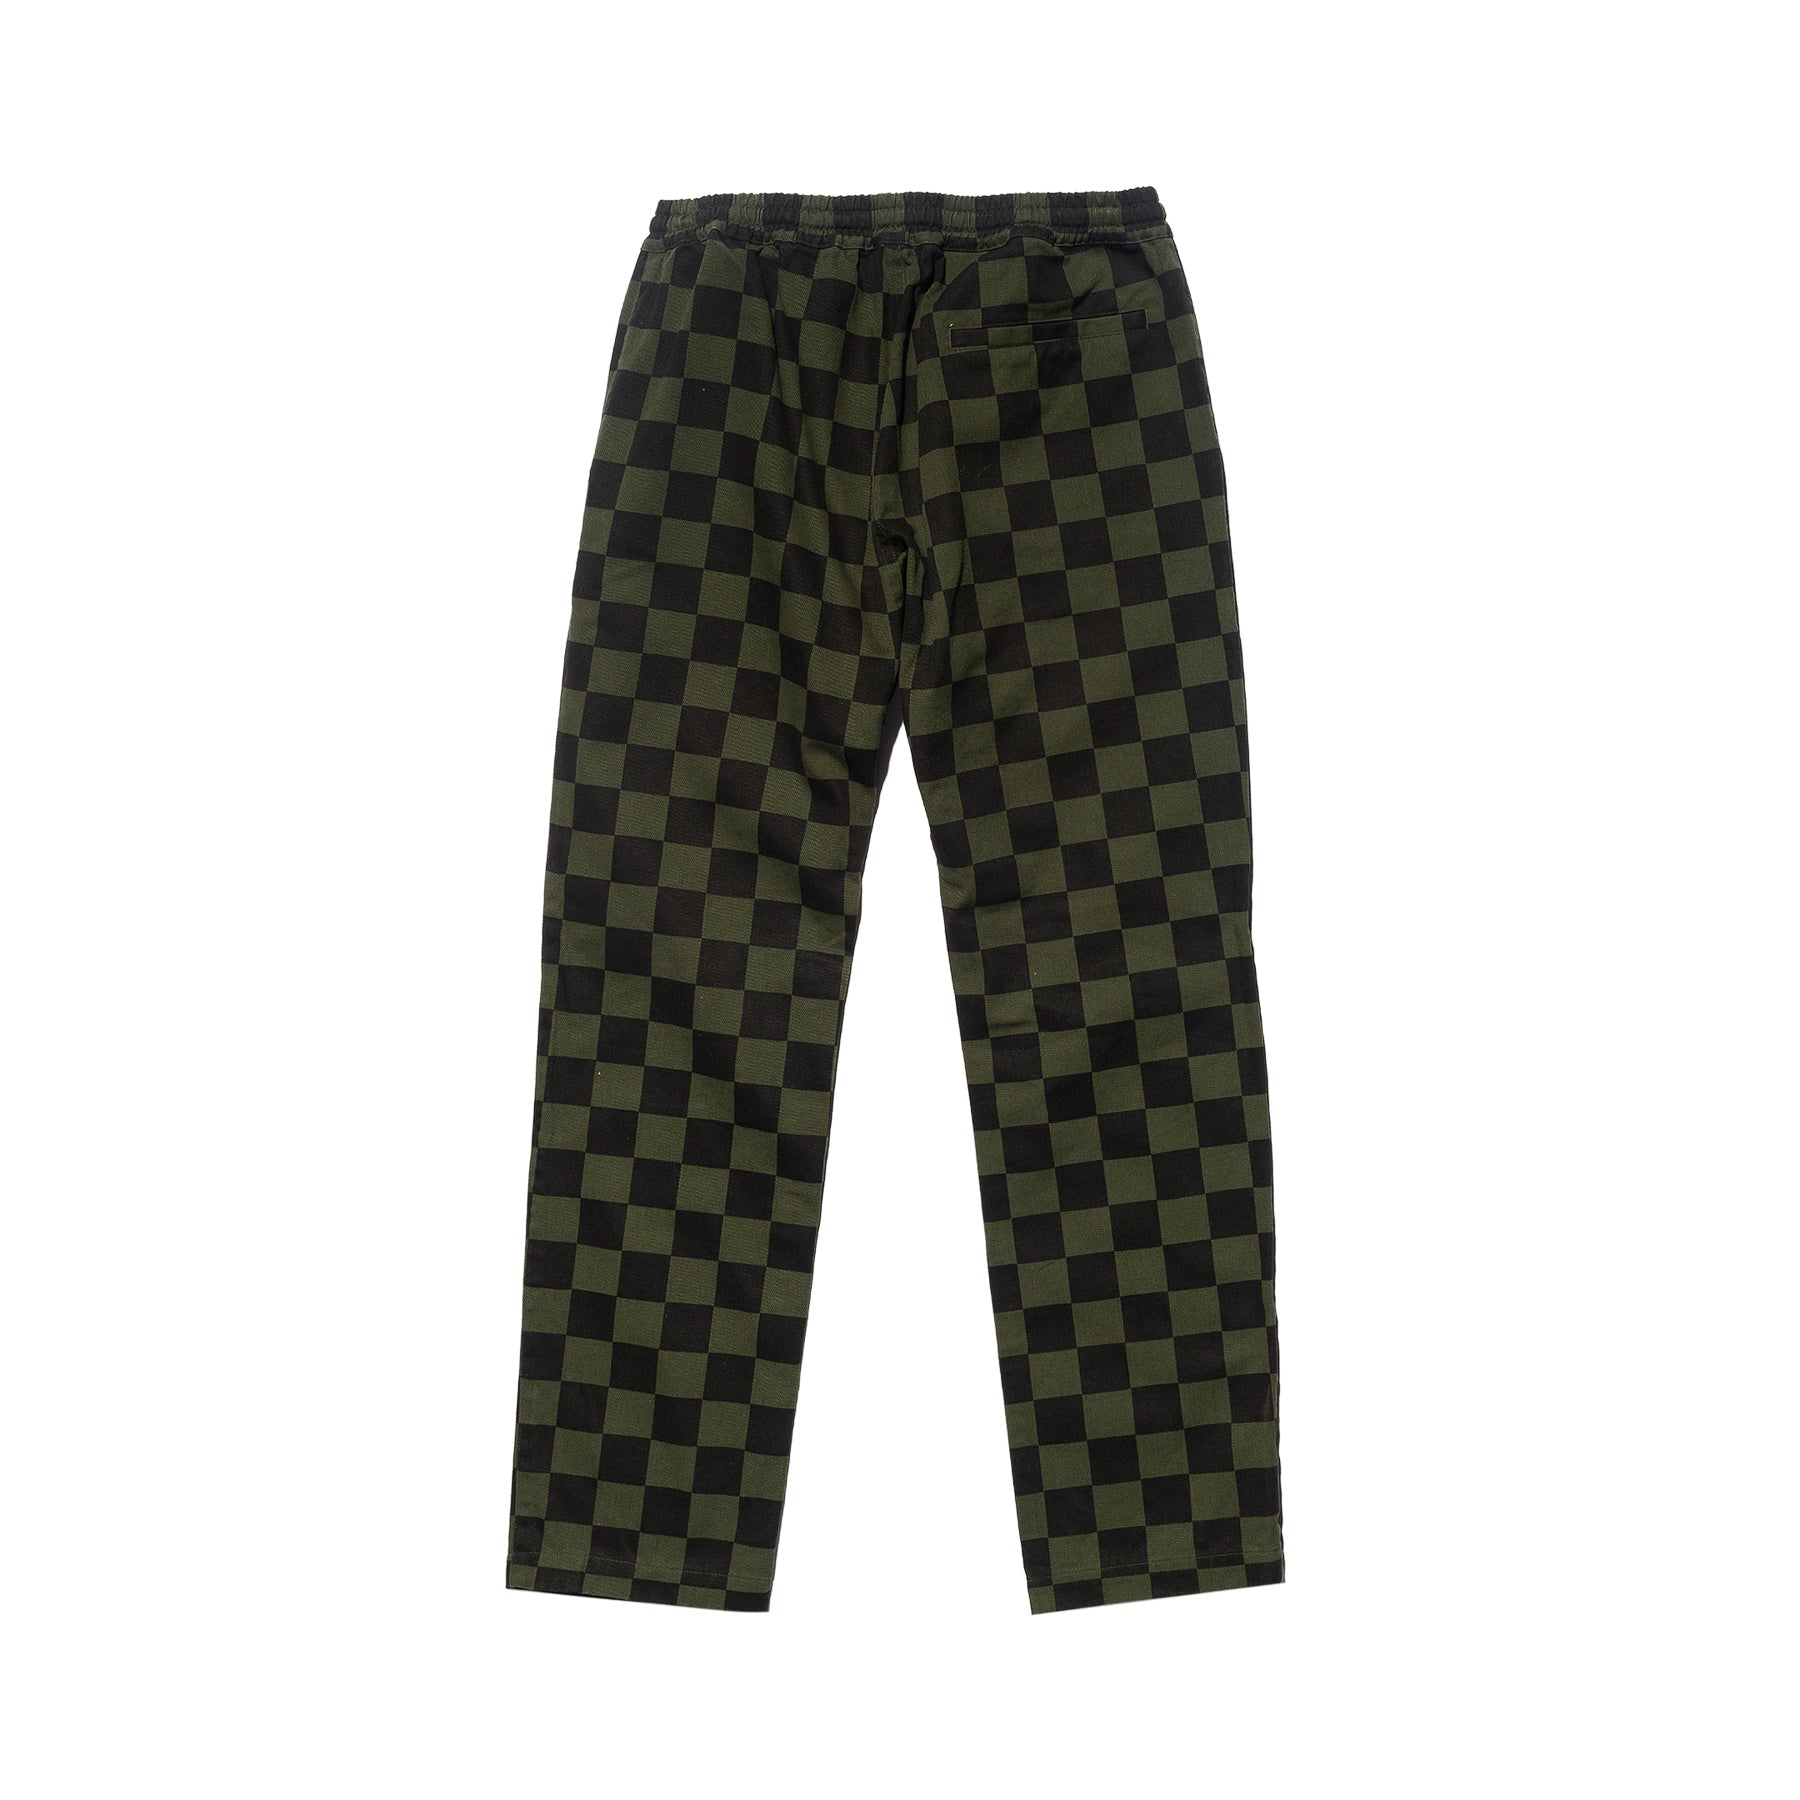 Grei Relaxed Gusset Easy Pant Check Twill Olive Brown